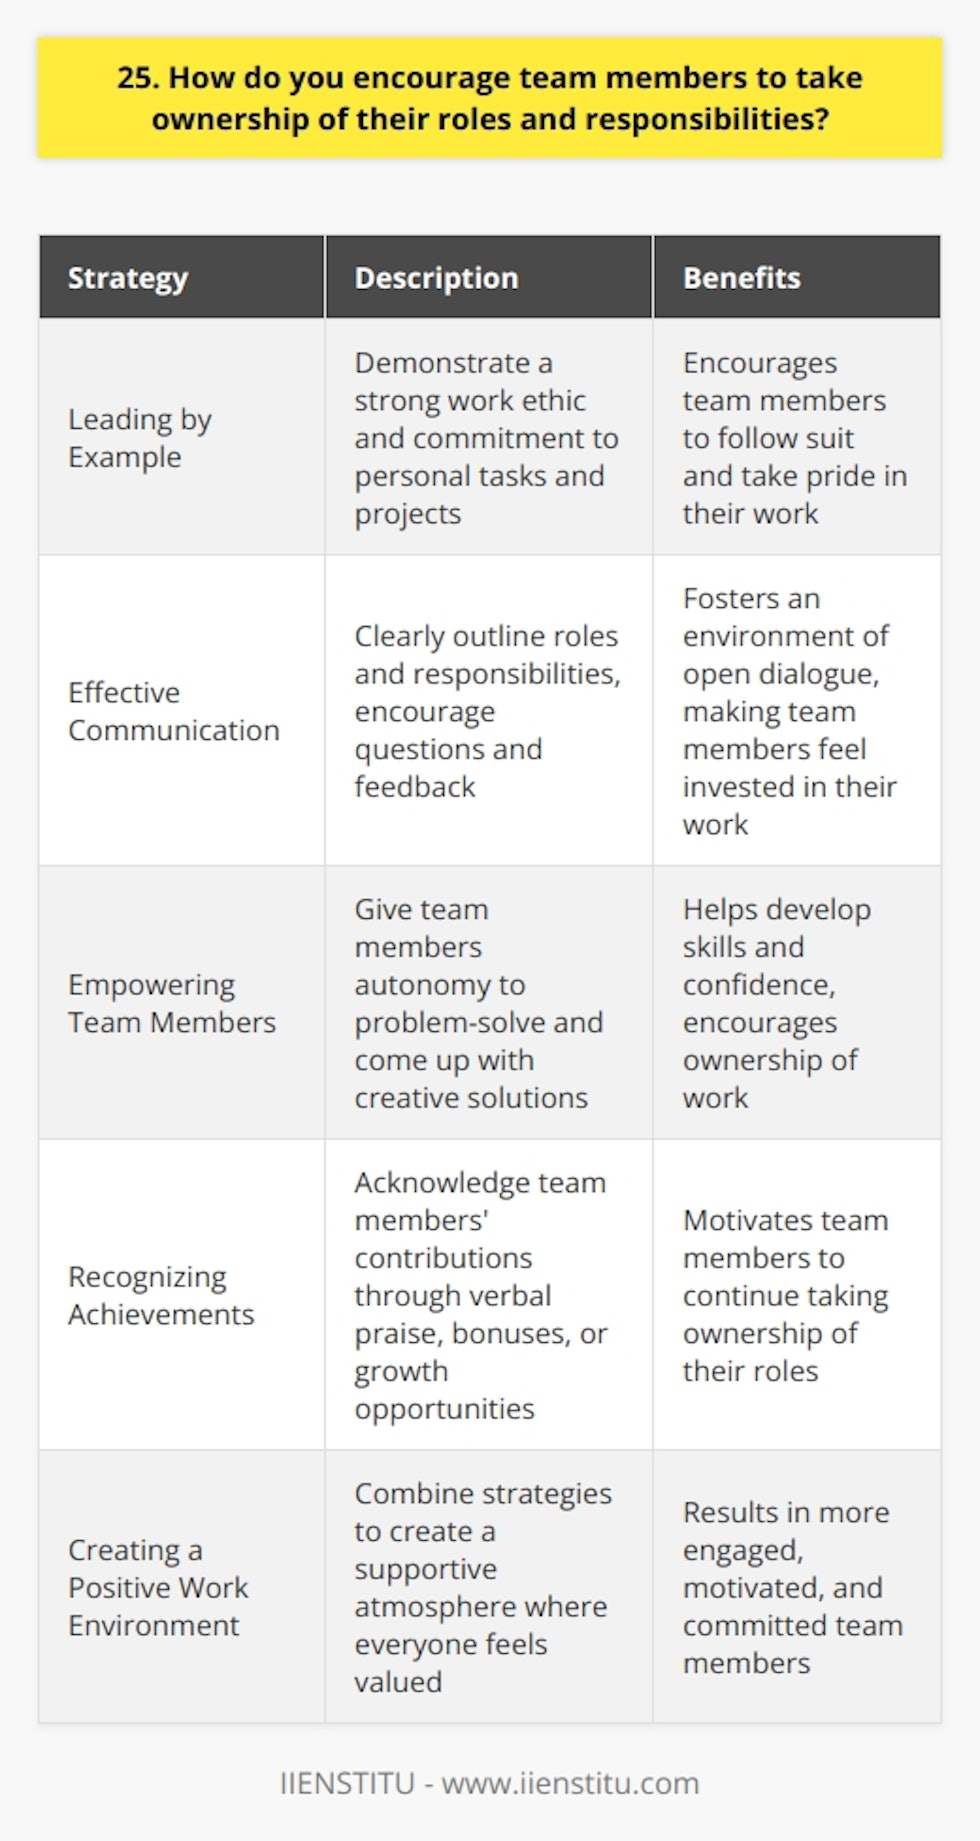 When it comes to encouraging team members to take ownership of their roles and responsibilities, I believe in leading by example. As a manager, I always strive to demonstrate a strong work ethic and commitment to my own tasks and projects. By setting a positive example, I find that team members are more likely to follow suit and take pride in their own work. Effective Communication I also prioritize open and transparent communication within the team. I make sure to clearly outline each team members roles and responsibilities, and I encourage them to ask questions and provide feedback. By fostering an environment of open dialogue, team members feel more invested in their work and are more likely to take ownership of their tasks. Empowering Team Members Another key strategy I use is empowering team members to make decisions and take initiative within their roles. Rather than micromanaging, I give team members the autonomy to problem-solve and come up with creative solutions. This not only helps them develop their skills and confidence but also encourages them to take ownership of their work. Recognizing Achievements Finally, I believe in recognizing and rewarding team members for their hard work and accomplishments. Whether its through verbal praise, bonuses, or opportunities for growth and development, acknowledging team members contributions goes a long way in motivating them to continue taking ownership of their roles. By combining these strategies of leading by example, communicating effectively, empowering team members, and recognizing achievements, Ive found that teams become more engaged, motivated, and committed to their work. Its all about creating a positive and supportive work environment where everyone feels valued and invested in the success of the team.